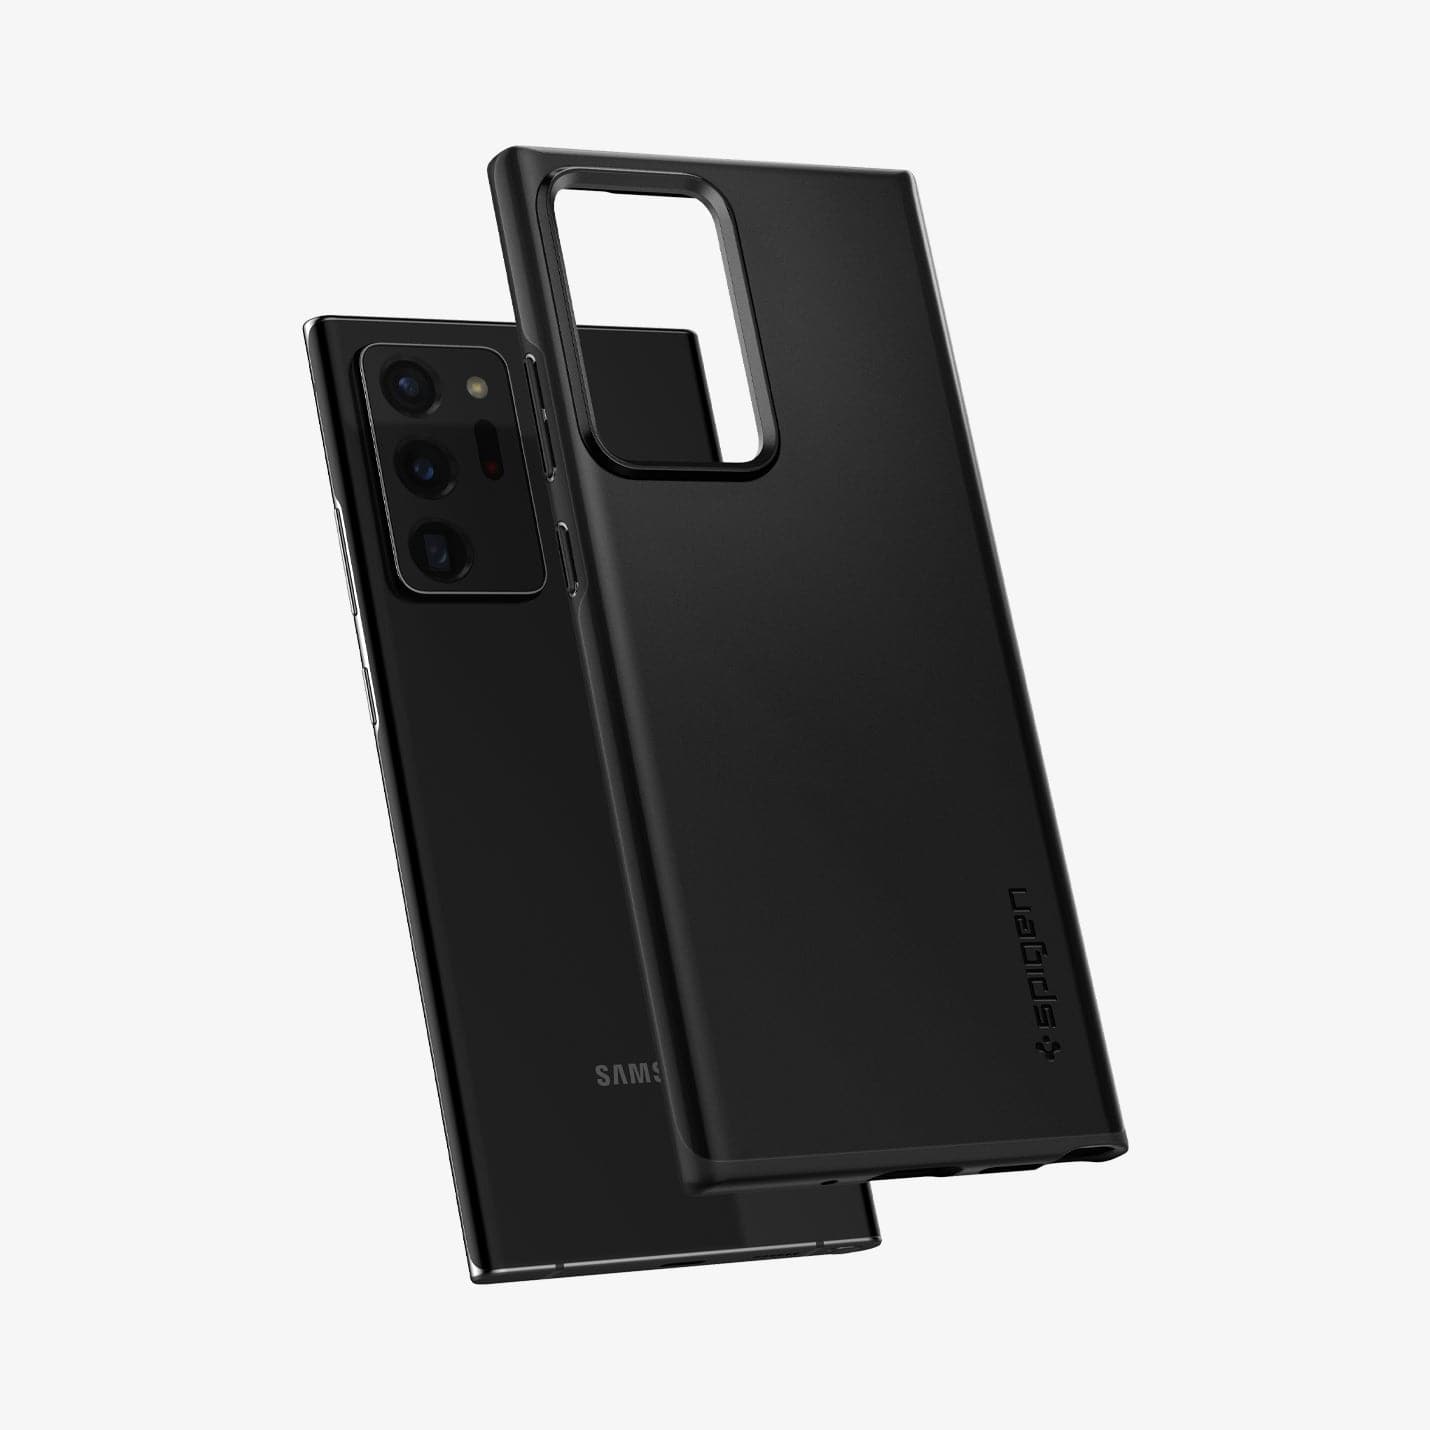 ACS01388 - Galaxy Note 20 Ultra Thin Fit Case in black showing the back with case hovering away from the device